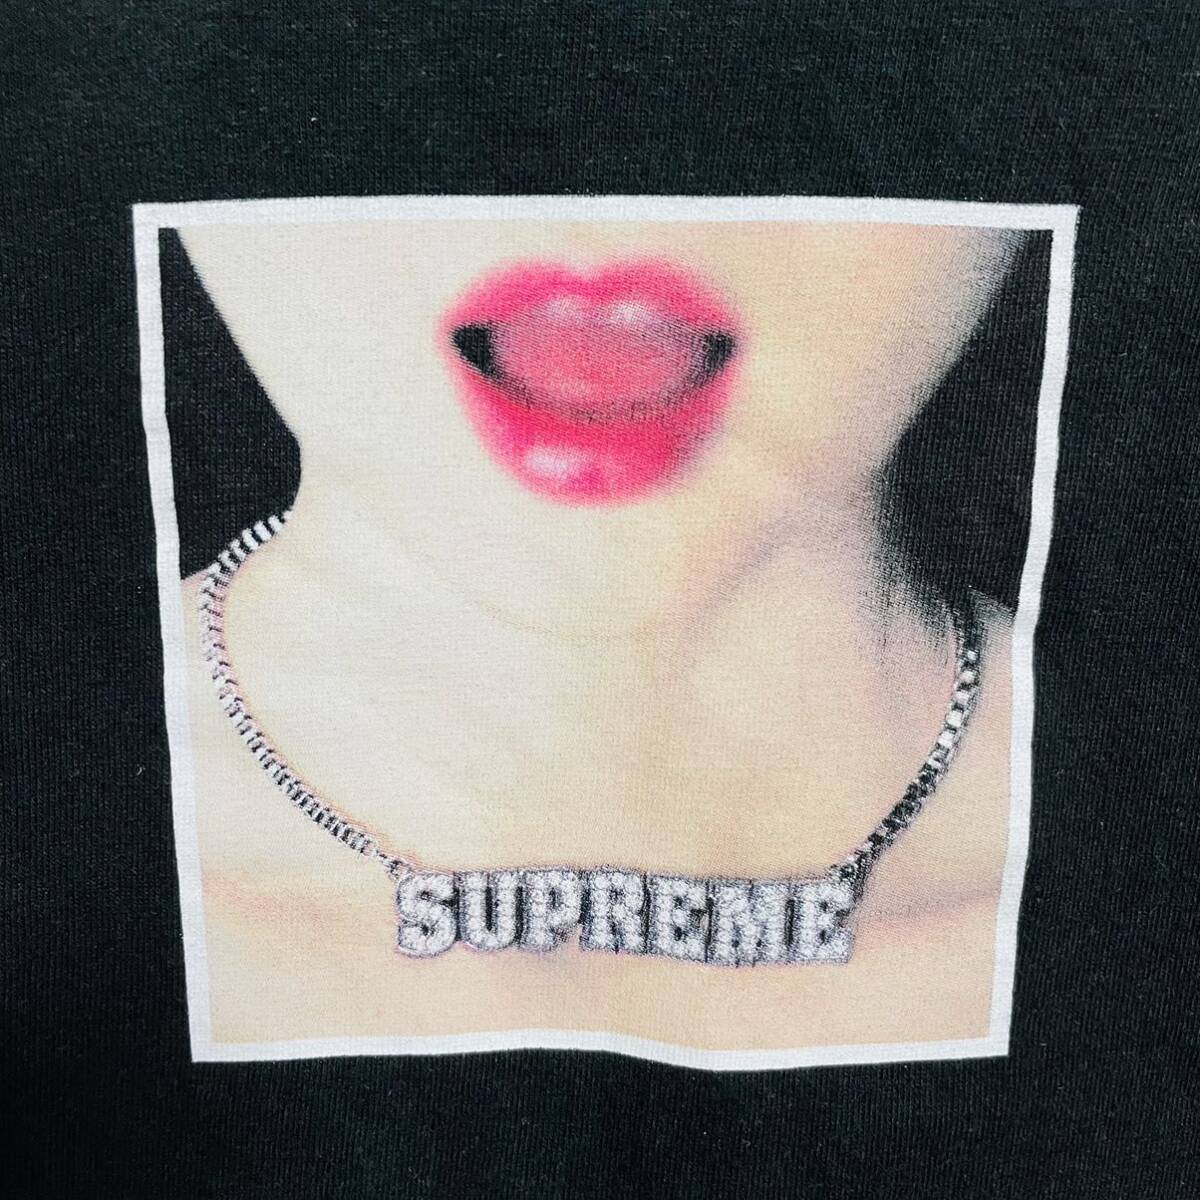 Supreme Necklace Tee Black S 18ss 2018年 黒 ブラック ネックレス_画像3